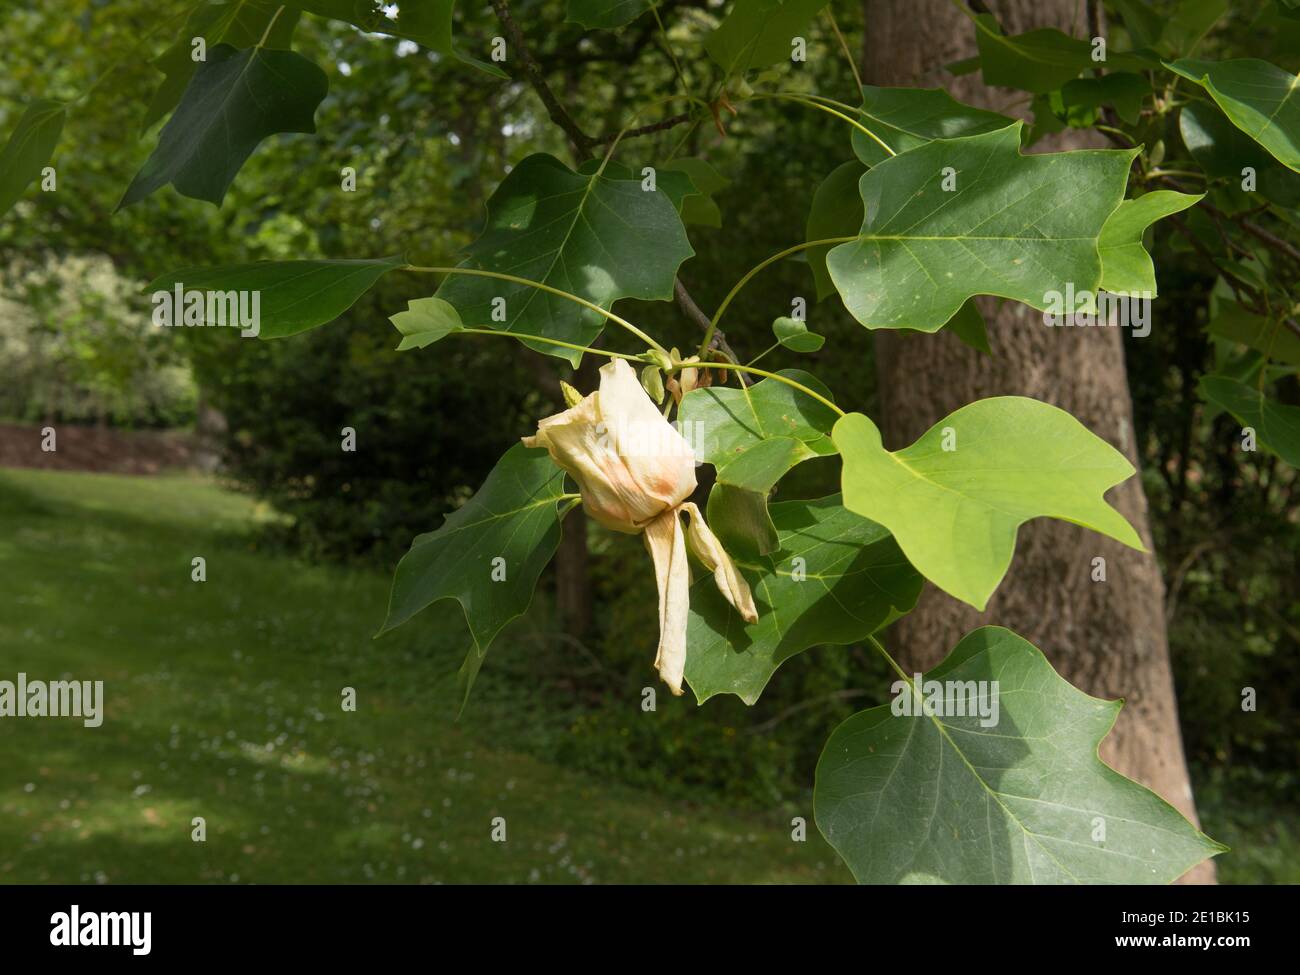 Summer Foliage and Flowers on a Tulip Tree (Liriodendron tulipifera) Growing in a Garden in Rural Somerset, England, UK Stock Photo